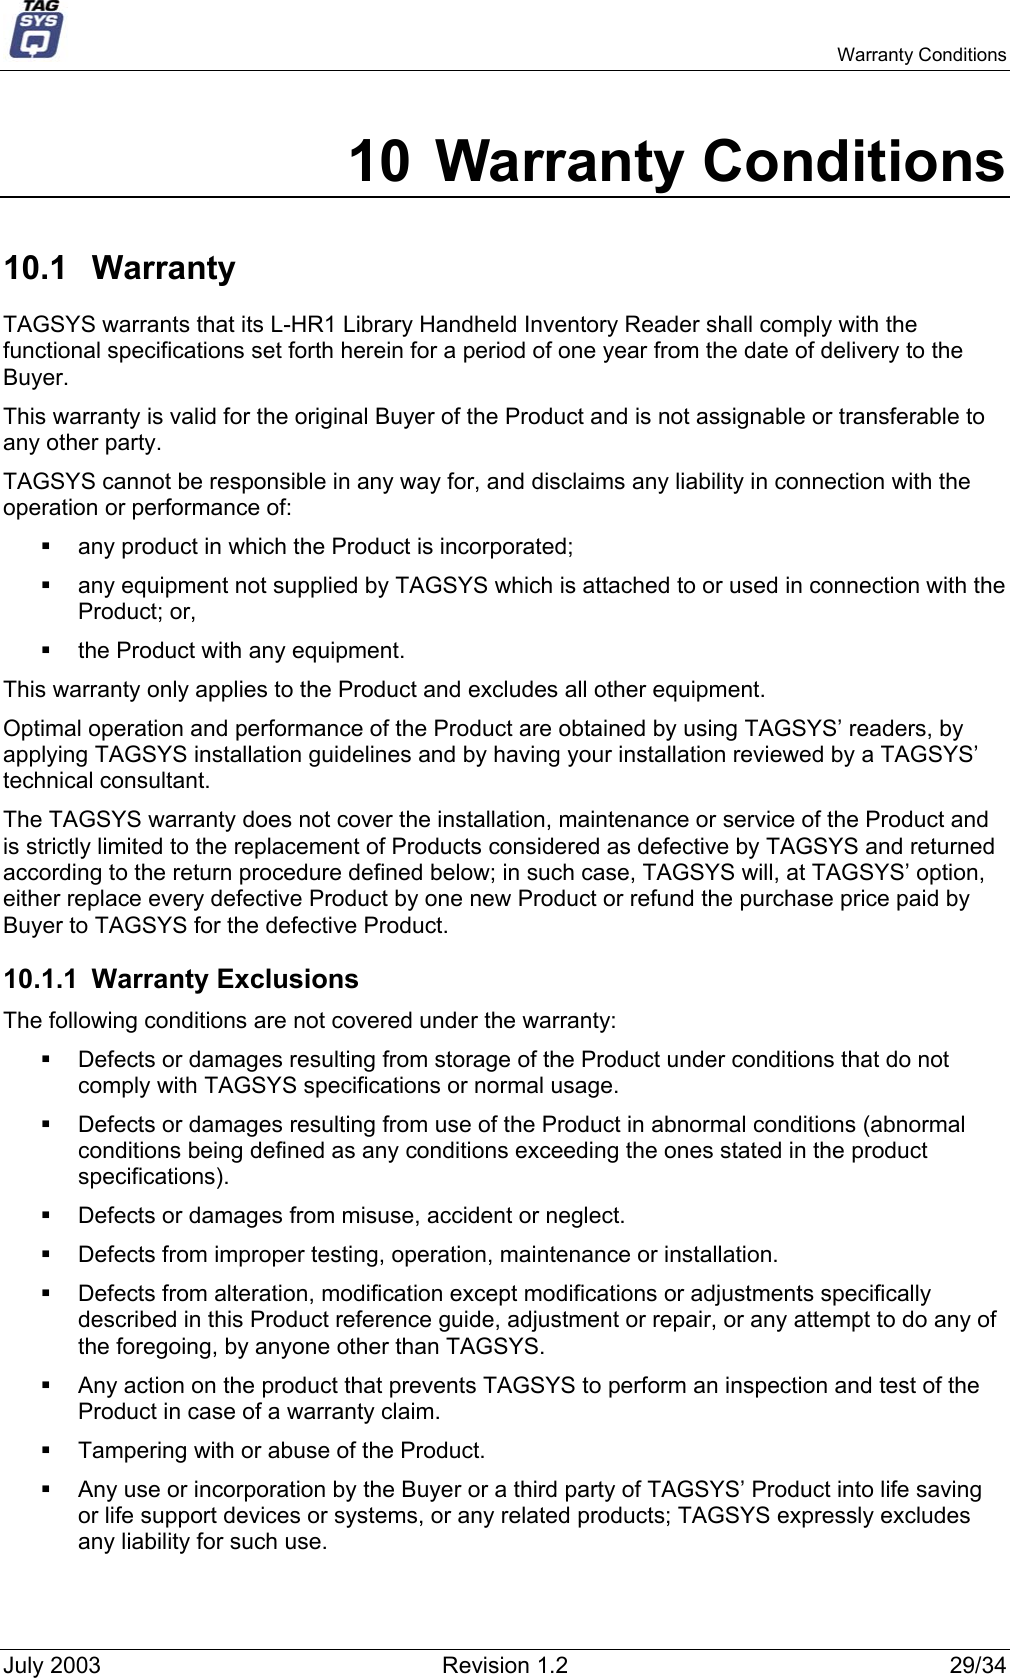   Warranty Conditions 10 Warranty Conditions 10.1 Warranty TAGSYS warrants that its L-HR1 Library Handheld Inventory Reader shall comply with the functional specifications set forth herein for a period of one year from the date of delivery to the Buyer. This warranty is valid for the original Buyer of the Product and is not assignable or transferable to any other party. TAGSYS cannot be responsible in any way for, and disclaims any liability in connection with the operation or performance of:   any product in which the Product is incorporated;   any equipment not supplied by TAGSYS which is attached to or used in connection with the Product; or,   the Product with any equipment. This warranty only applies to the Product and excludes all other equipment. Optimal operation and performance of the Product are obtained by using TAGSYS’ readers, by applying TAGSYS installation guidelines and by having your installation reviewed by a TAGSYS’ technical consultant. The TAGSYS warranty does not cover the installation, maintenance or service of the Product and is strictly limited to the replacement of Products considered as defective by TAGSYS and returned according to the return procedure defined below; in such case, TAGSYS will, at TAGSYS’ option, either replace every defective Product by one new Product or refund the purchase price paid by Buyer to TAGSYS for the defective Product. 10.1.1 Warranty Exclusions  The following conditions are not covered under the warranty:   Defects or damages resulting from storage of the Product under conditions that do not comply with TAGSYS specifications or normal usage.   Defects or damages resulting from use of the Product in abnormal conditions (abnormal conditions being defined as any conditions exceeding the ones stated in the product specifications).   Defects or damages from misuse, accident or neglect.   Defects from improper testing, operation, maintenance or installation.   Defects from alteration, modification except modifications or adjustments specifically described in this Product reference guide, adjustment or repair, or any attempt to do any of the foregoing, by anyone other than TAGSYS.   Any action on the product that prevents TAGSYS to perform an inspection and test of the Product in case of a warranty claim.   Tampering with or abuse of the Product.   Any use or incorporation by the Buyer or a third party of TAGSYS’ Product into life saving or life support devices or systems, or any related products; TAGSYS expressly excludes any liability for such use. July 2003  Revision 1.2  29/34 